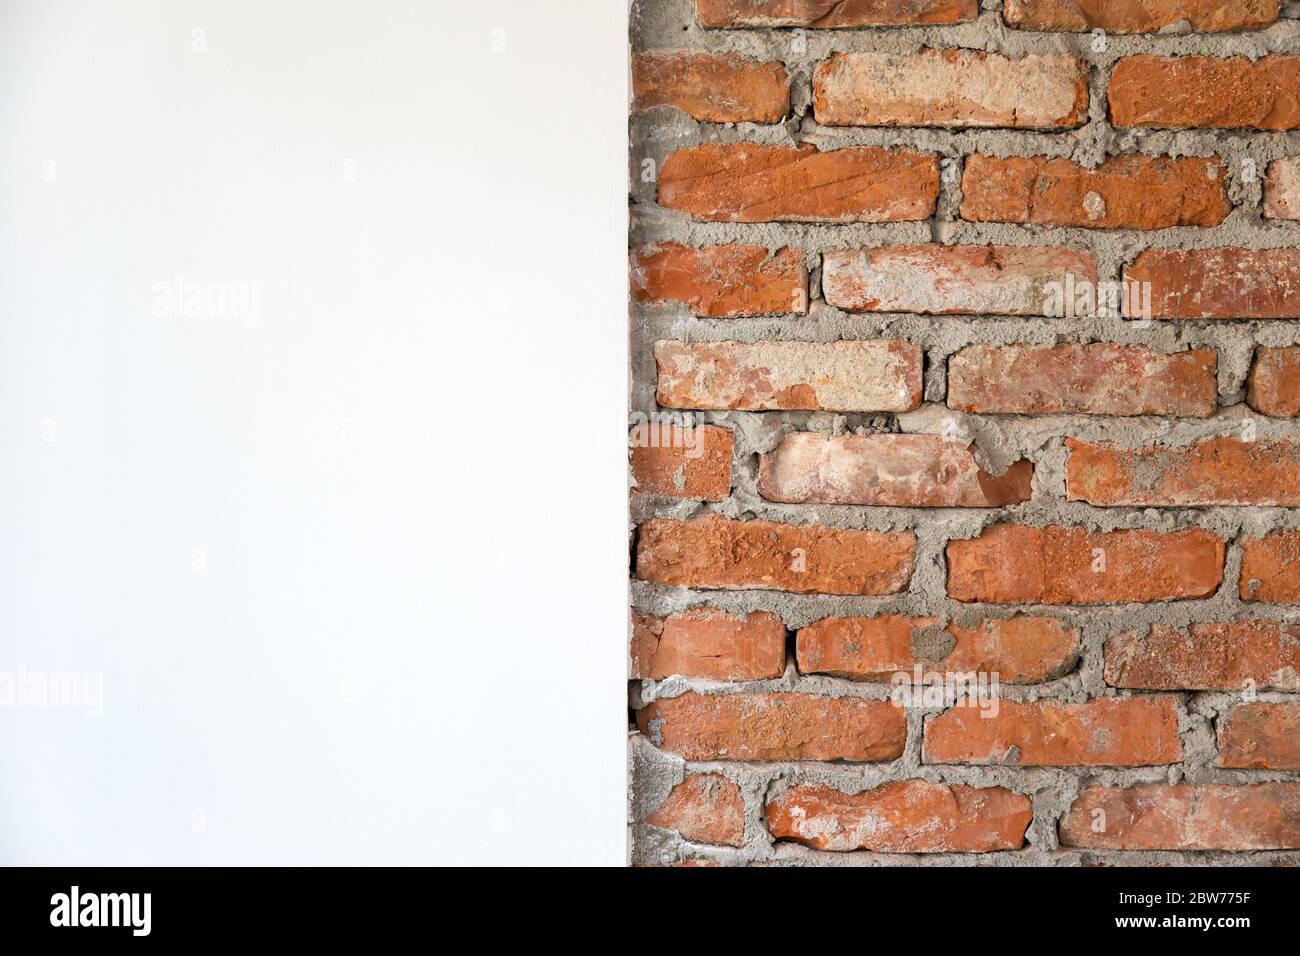 Wall with bricks and plaster and lime. Plastered and whitewashed wall next to a brick wall. Half wall with bricks and half with plaster and whitewashe Stock Photo